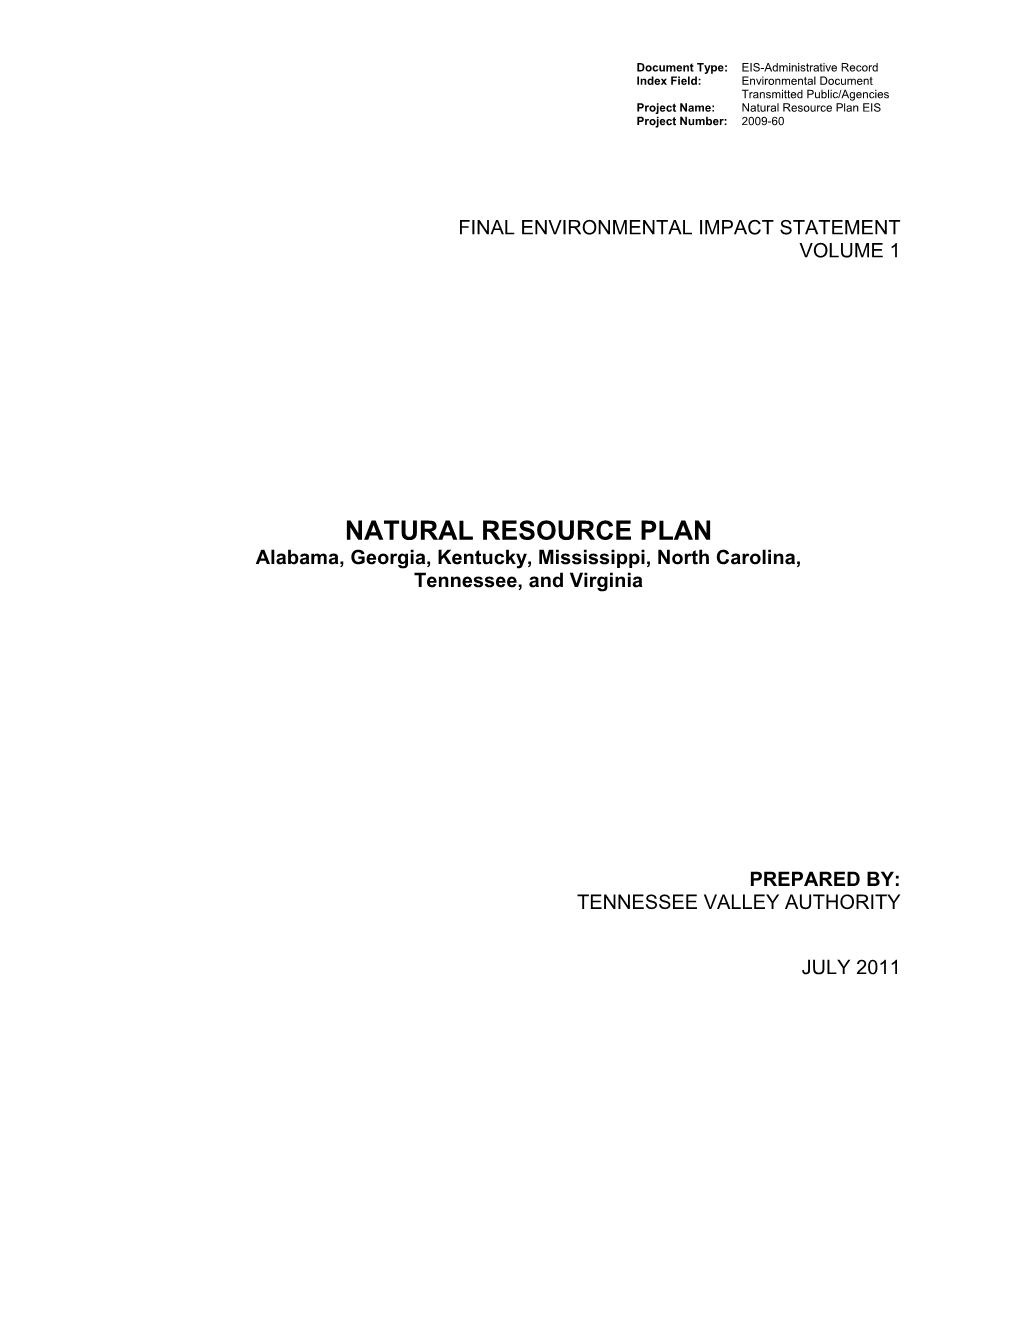 Natural Resource Plan EIS Project Number: 2009-60